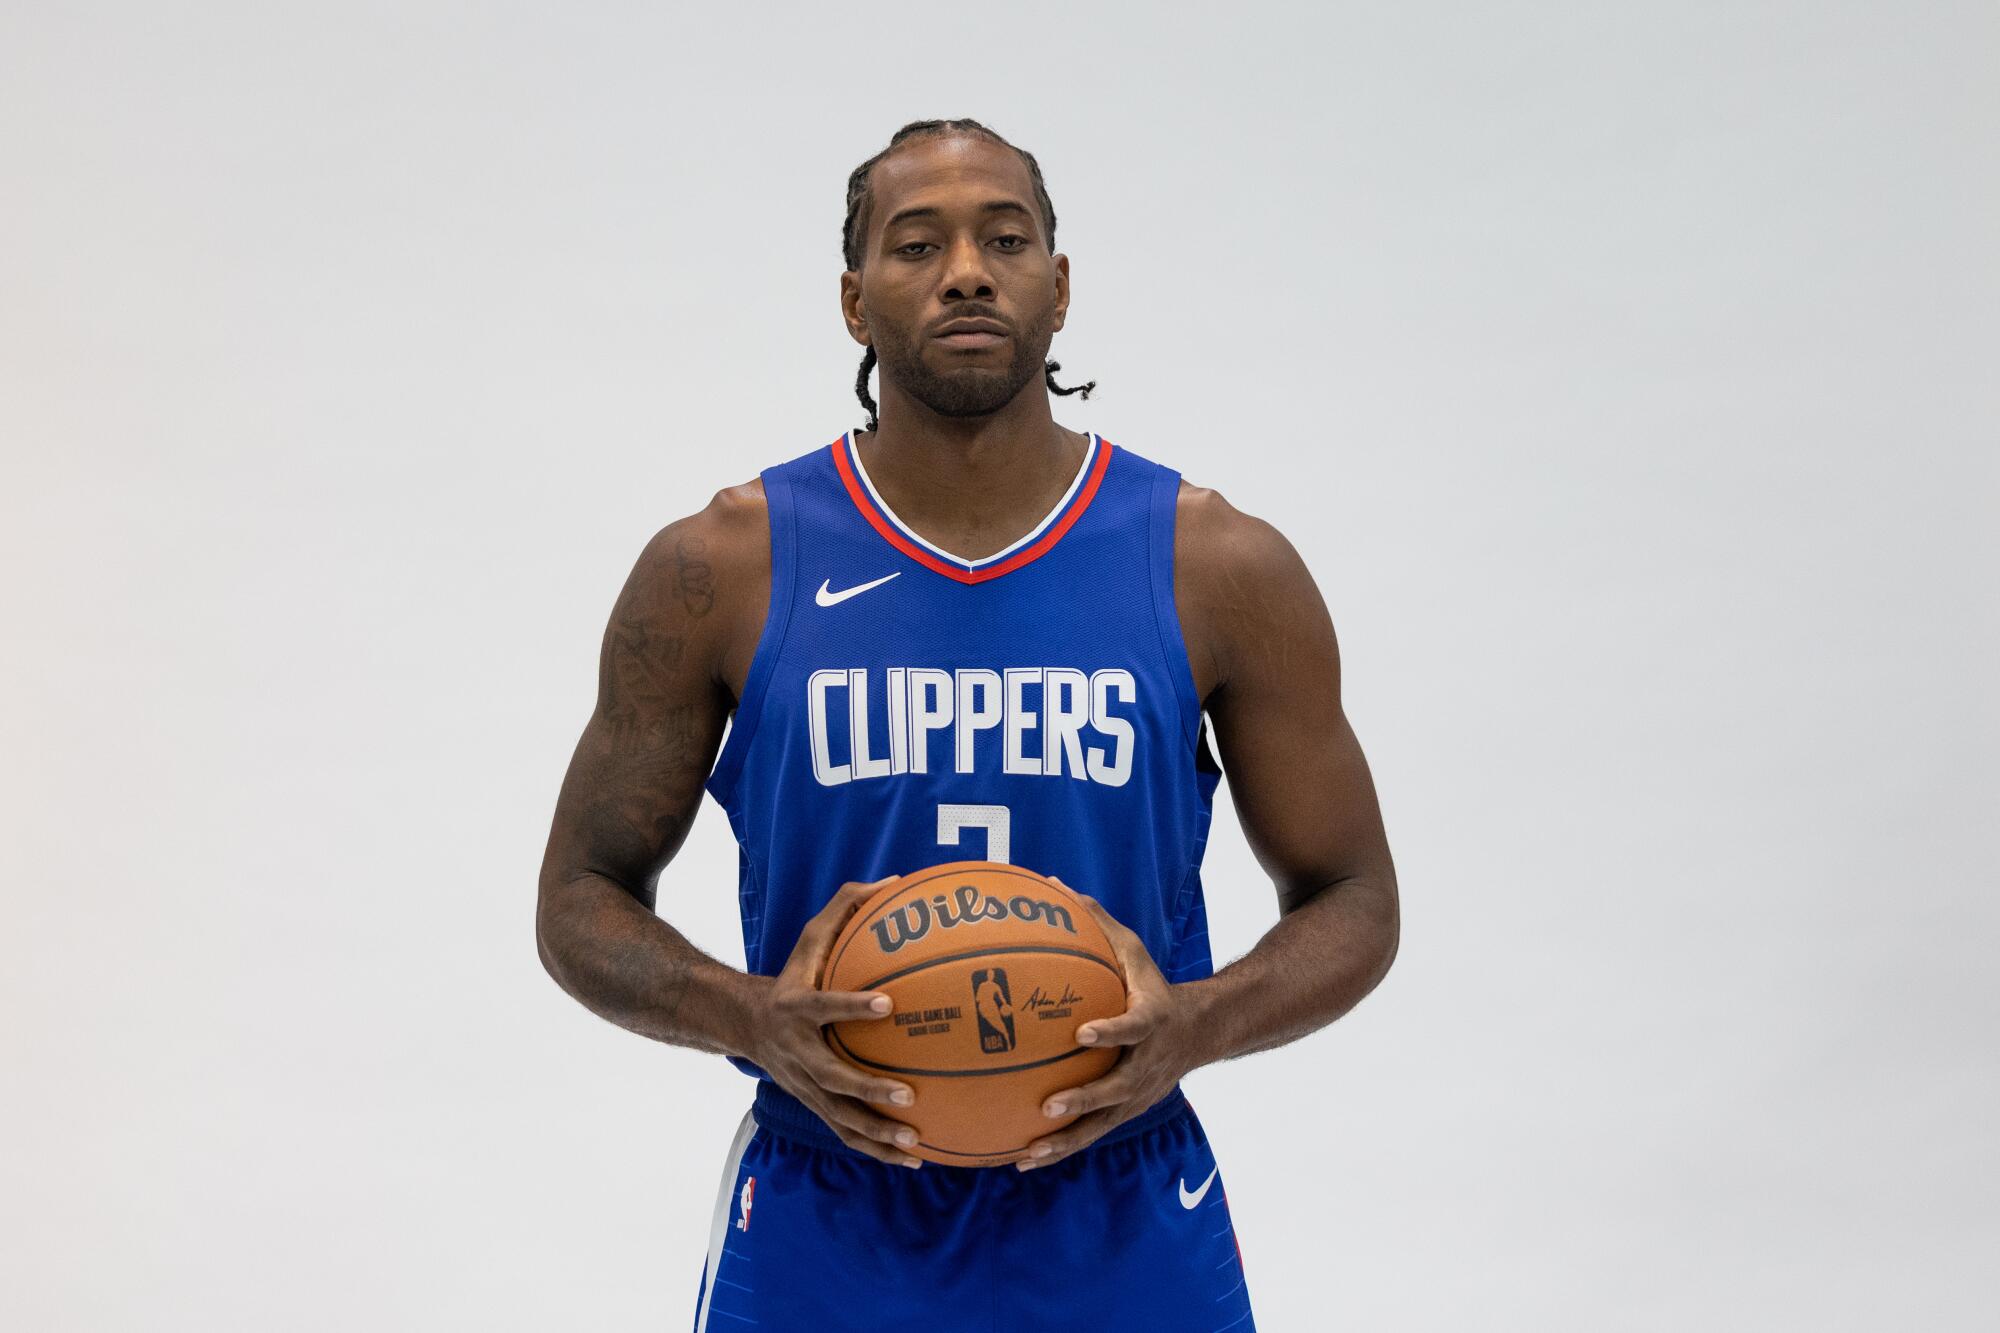 Kawhi Leonard poses for a portrait at Clippers media day.